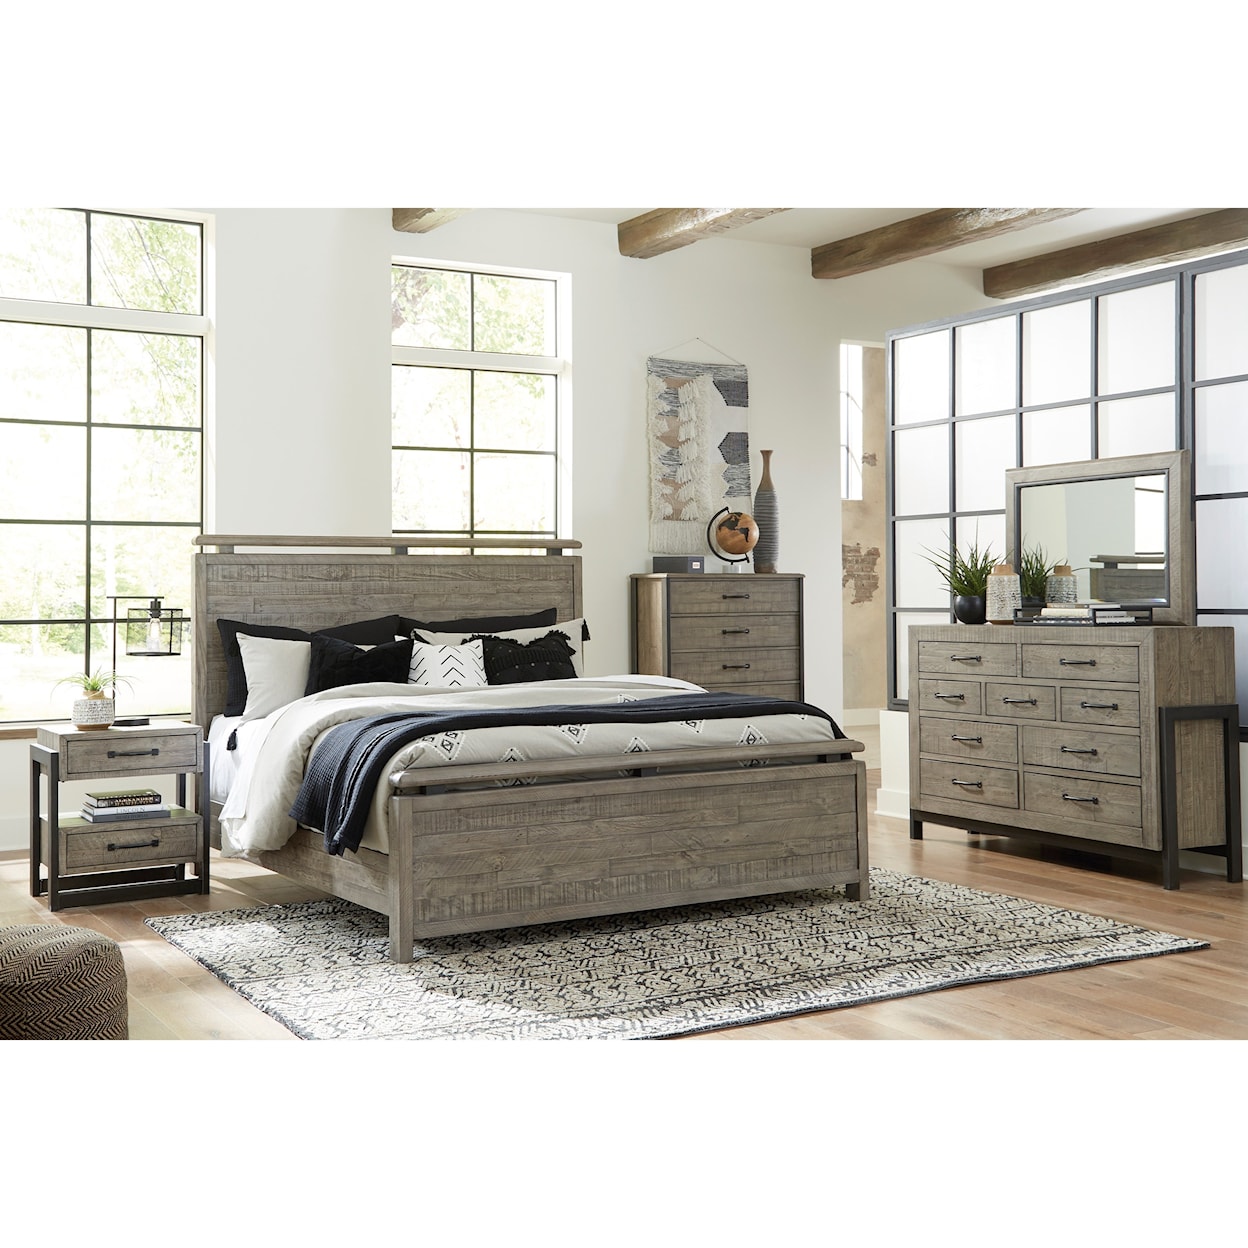 Signature Design by Ashley Brennagan Queen Bedroom Group